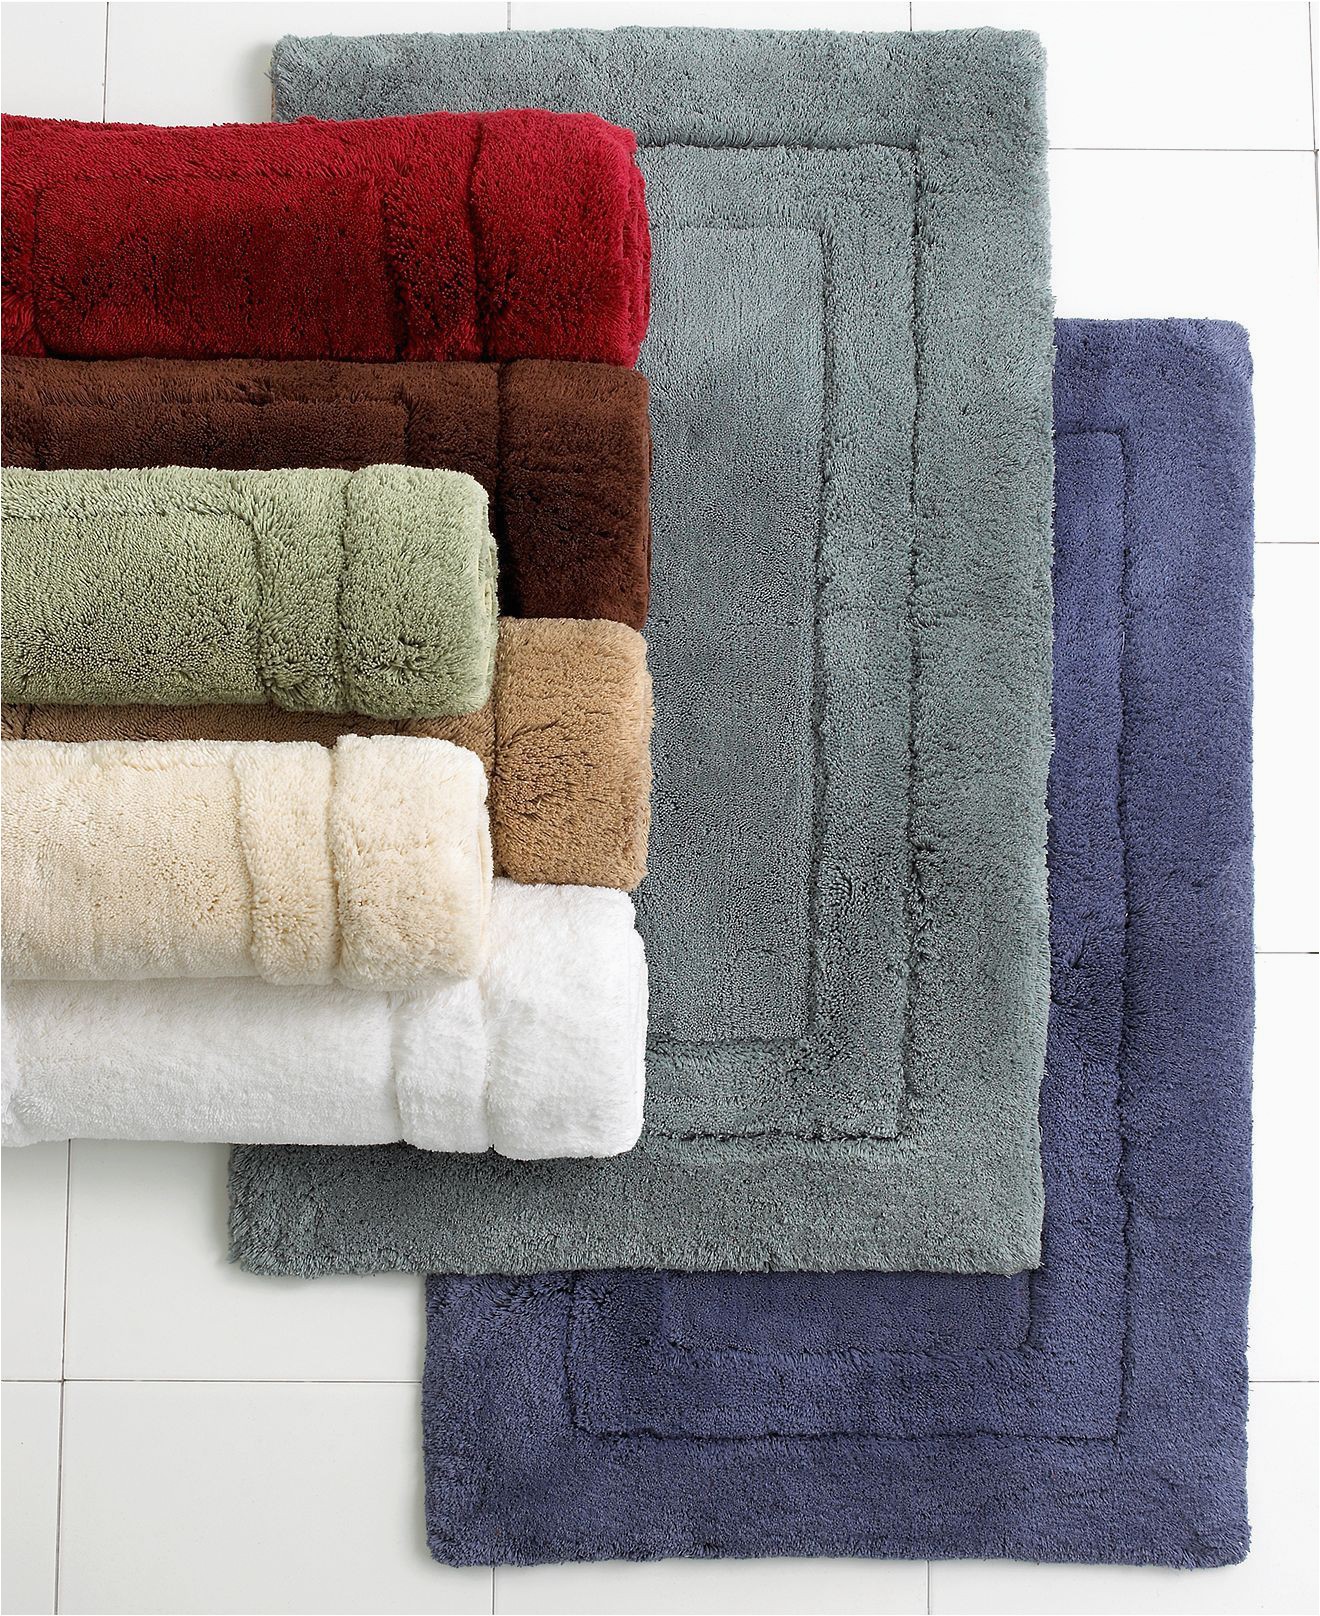 Hotel Collection Bathroom Rugs Hotel Collection Bathroom Rugs